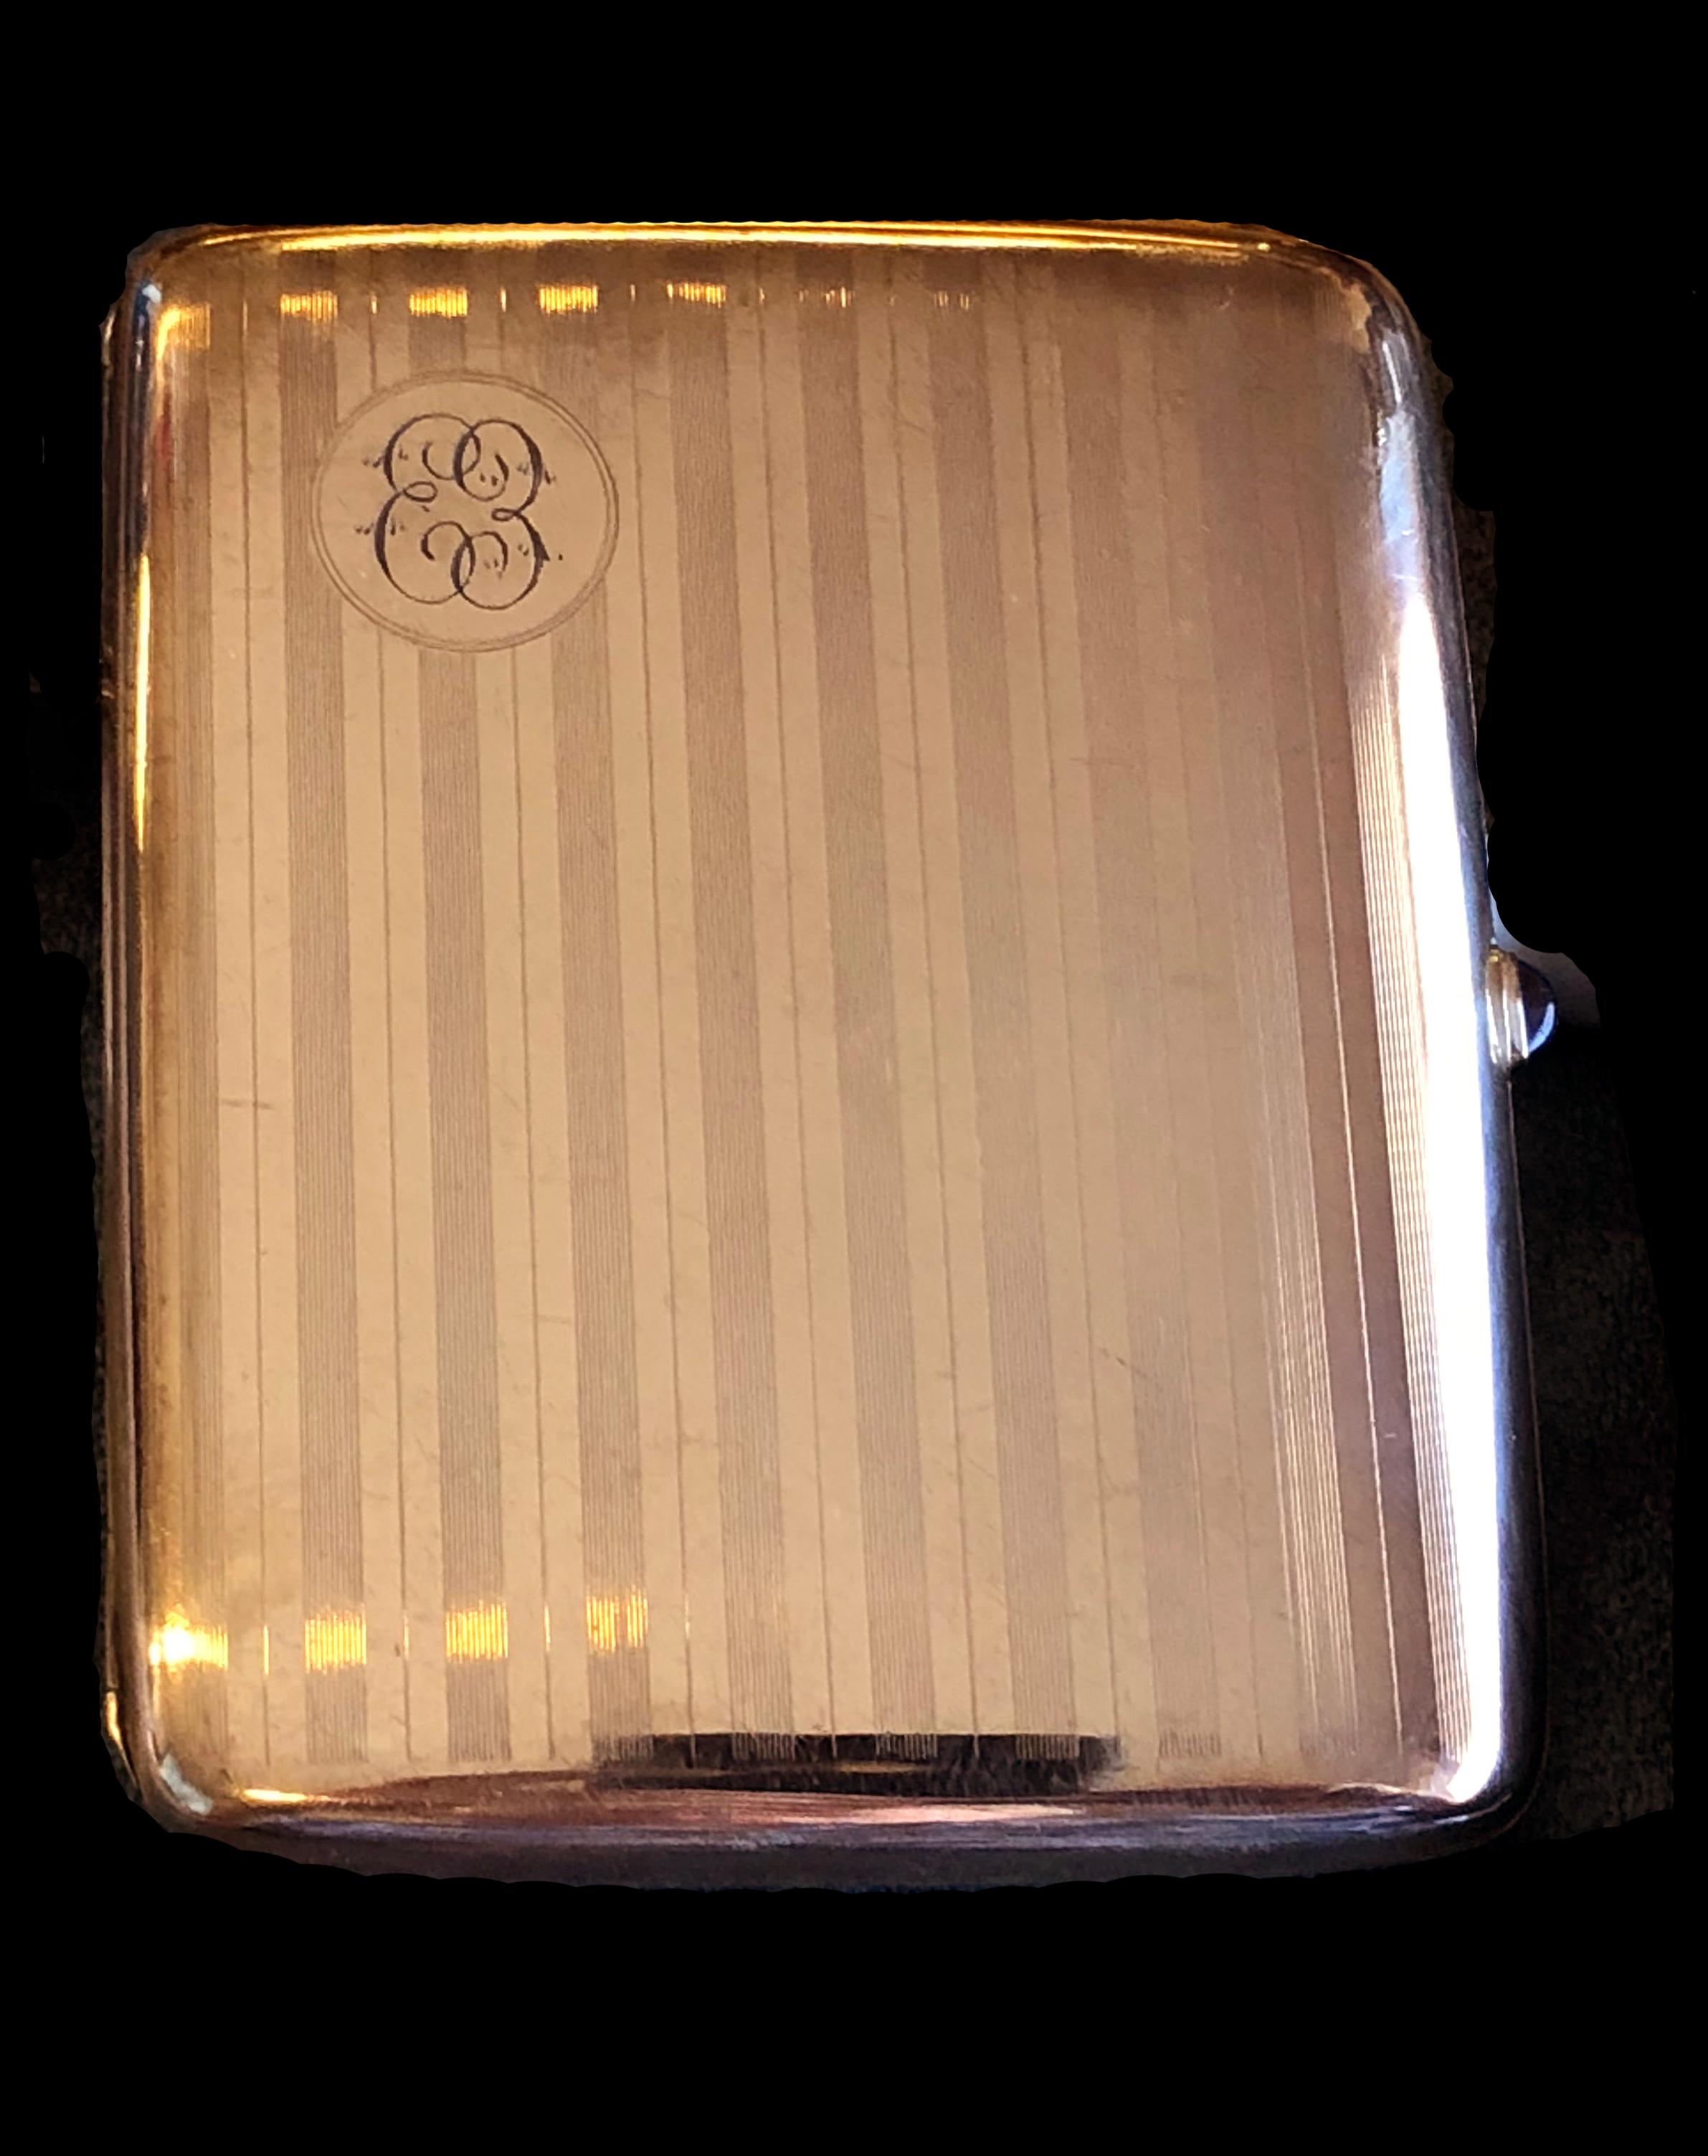 Patented 1915 Wightman & Hough Co. gold filled cigarette case. Monogrammed with a double 